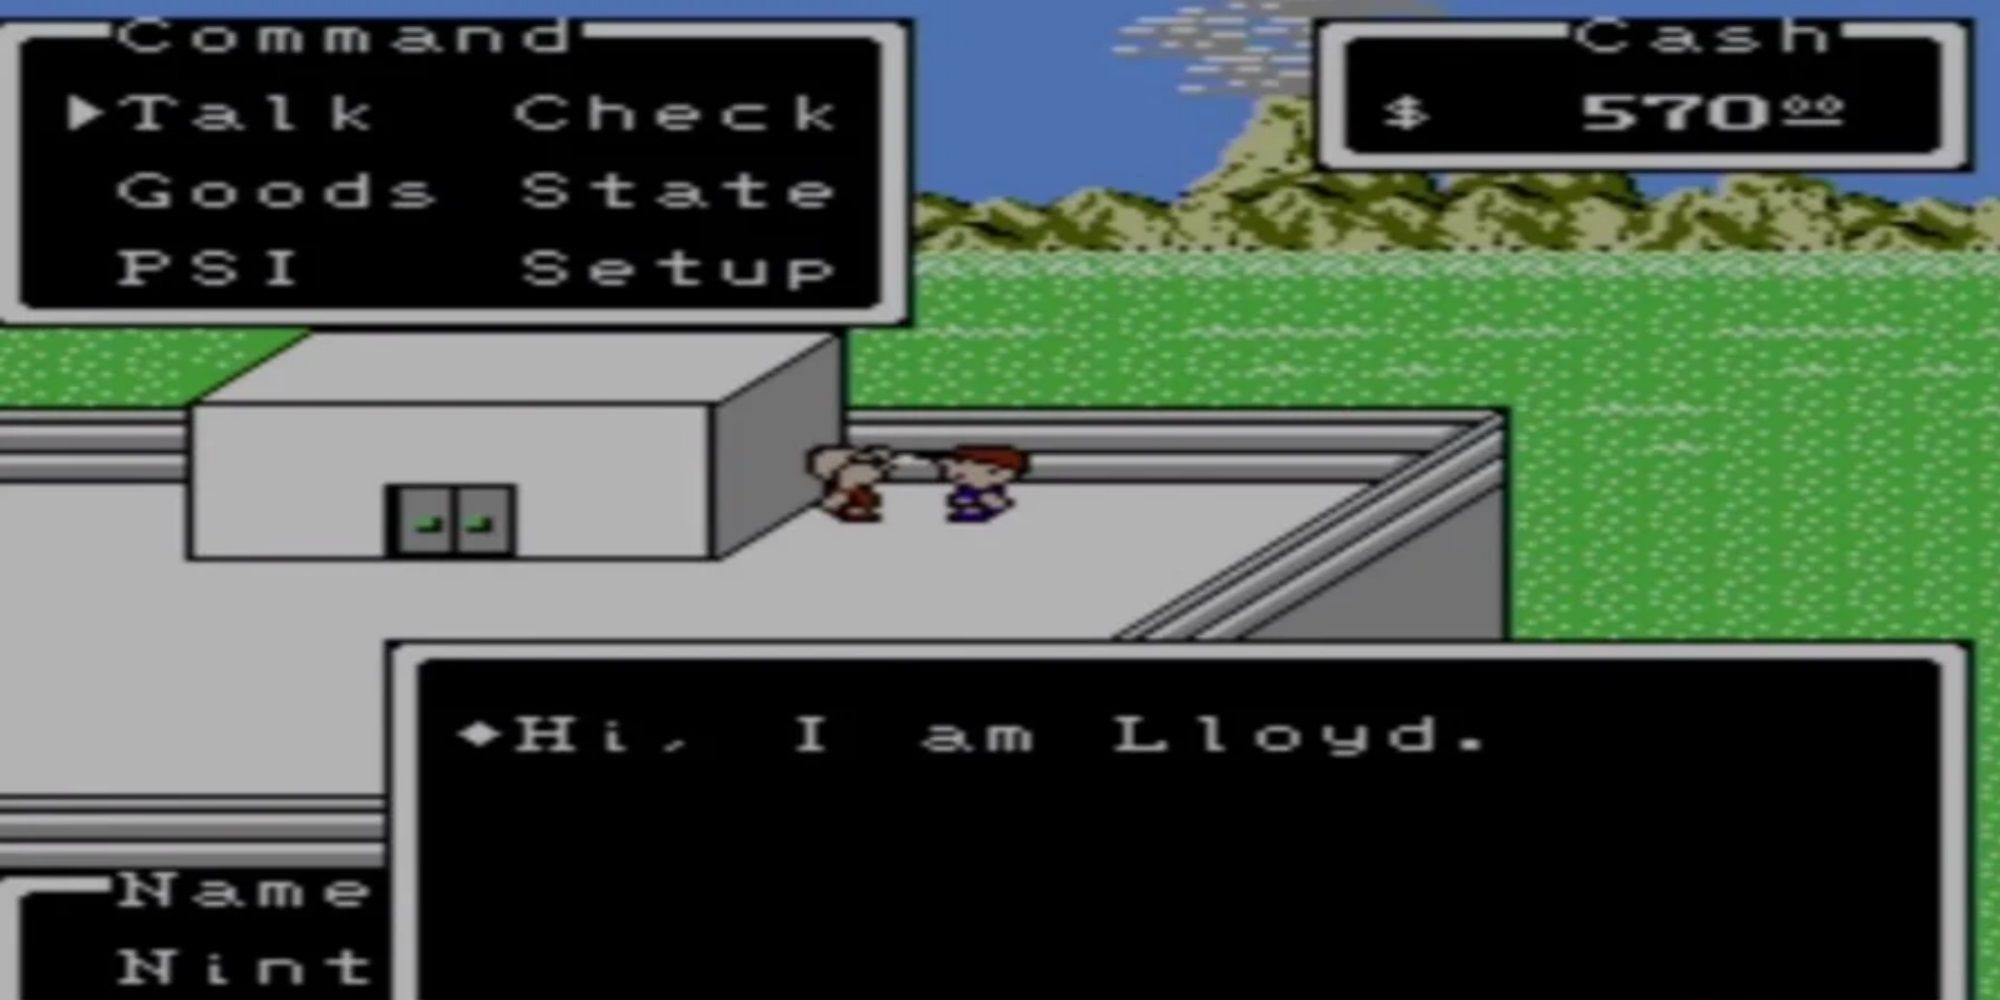 Earthbound Beginnings - Speaking to a character named Lloyd.